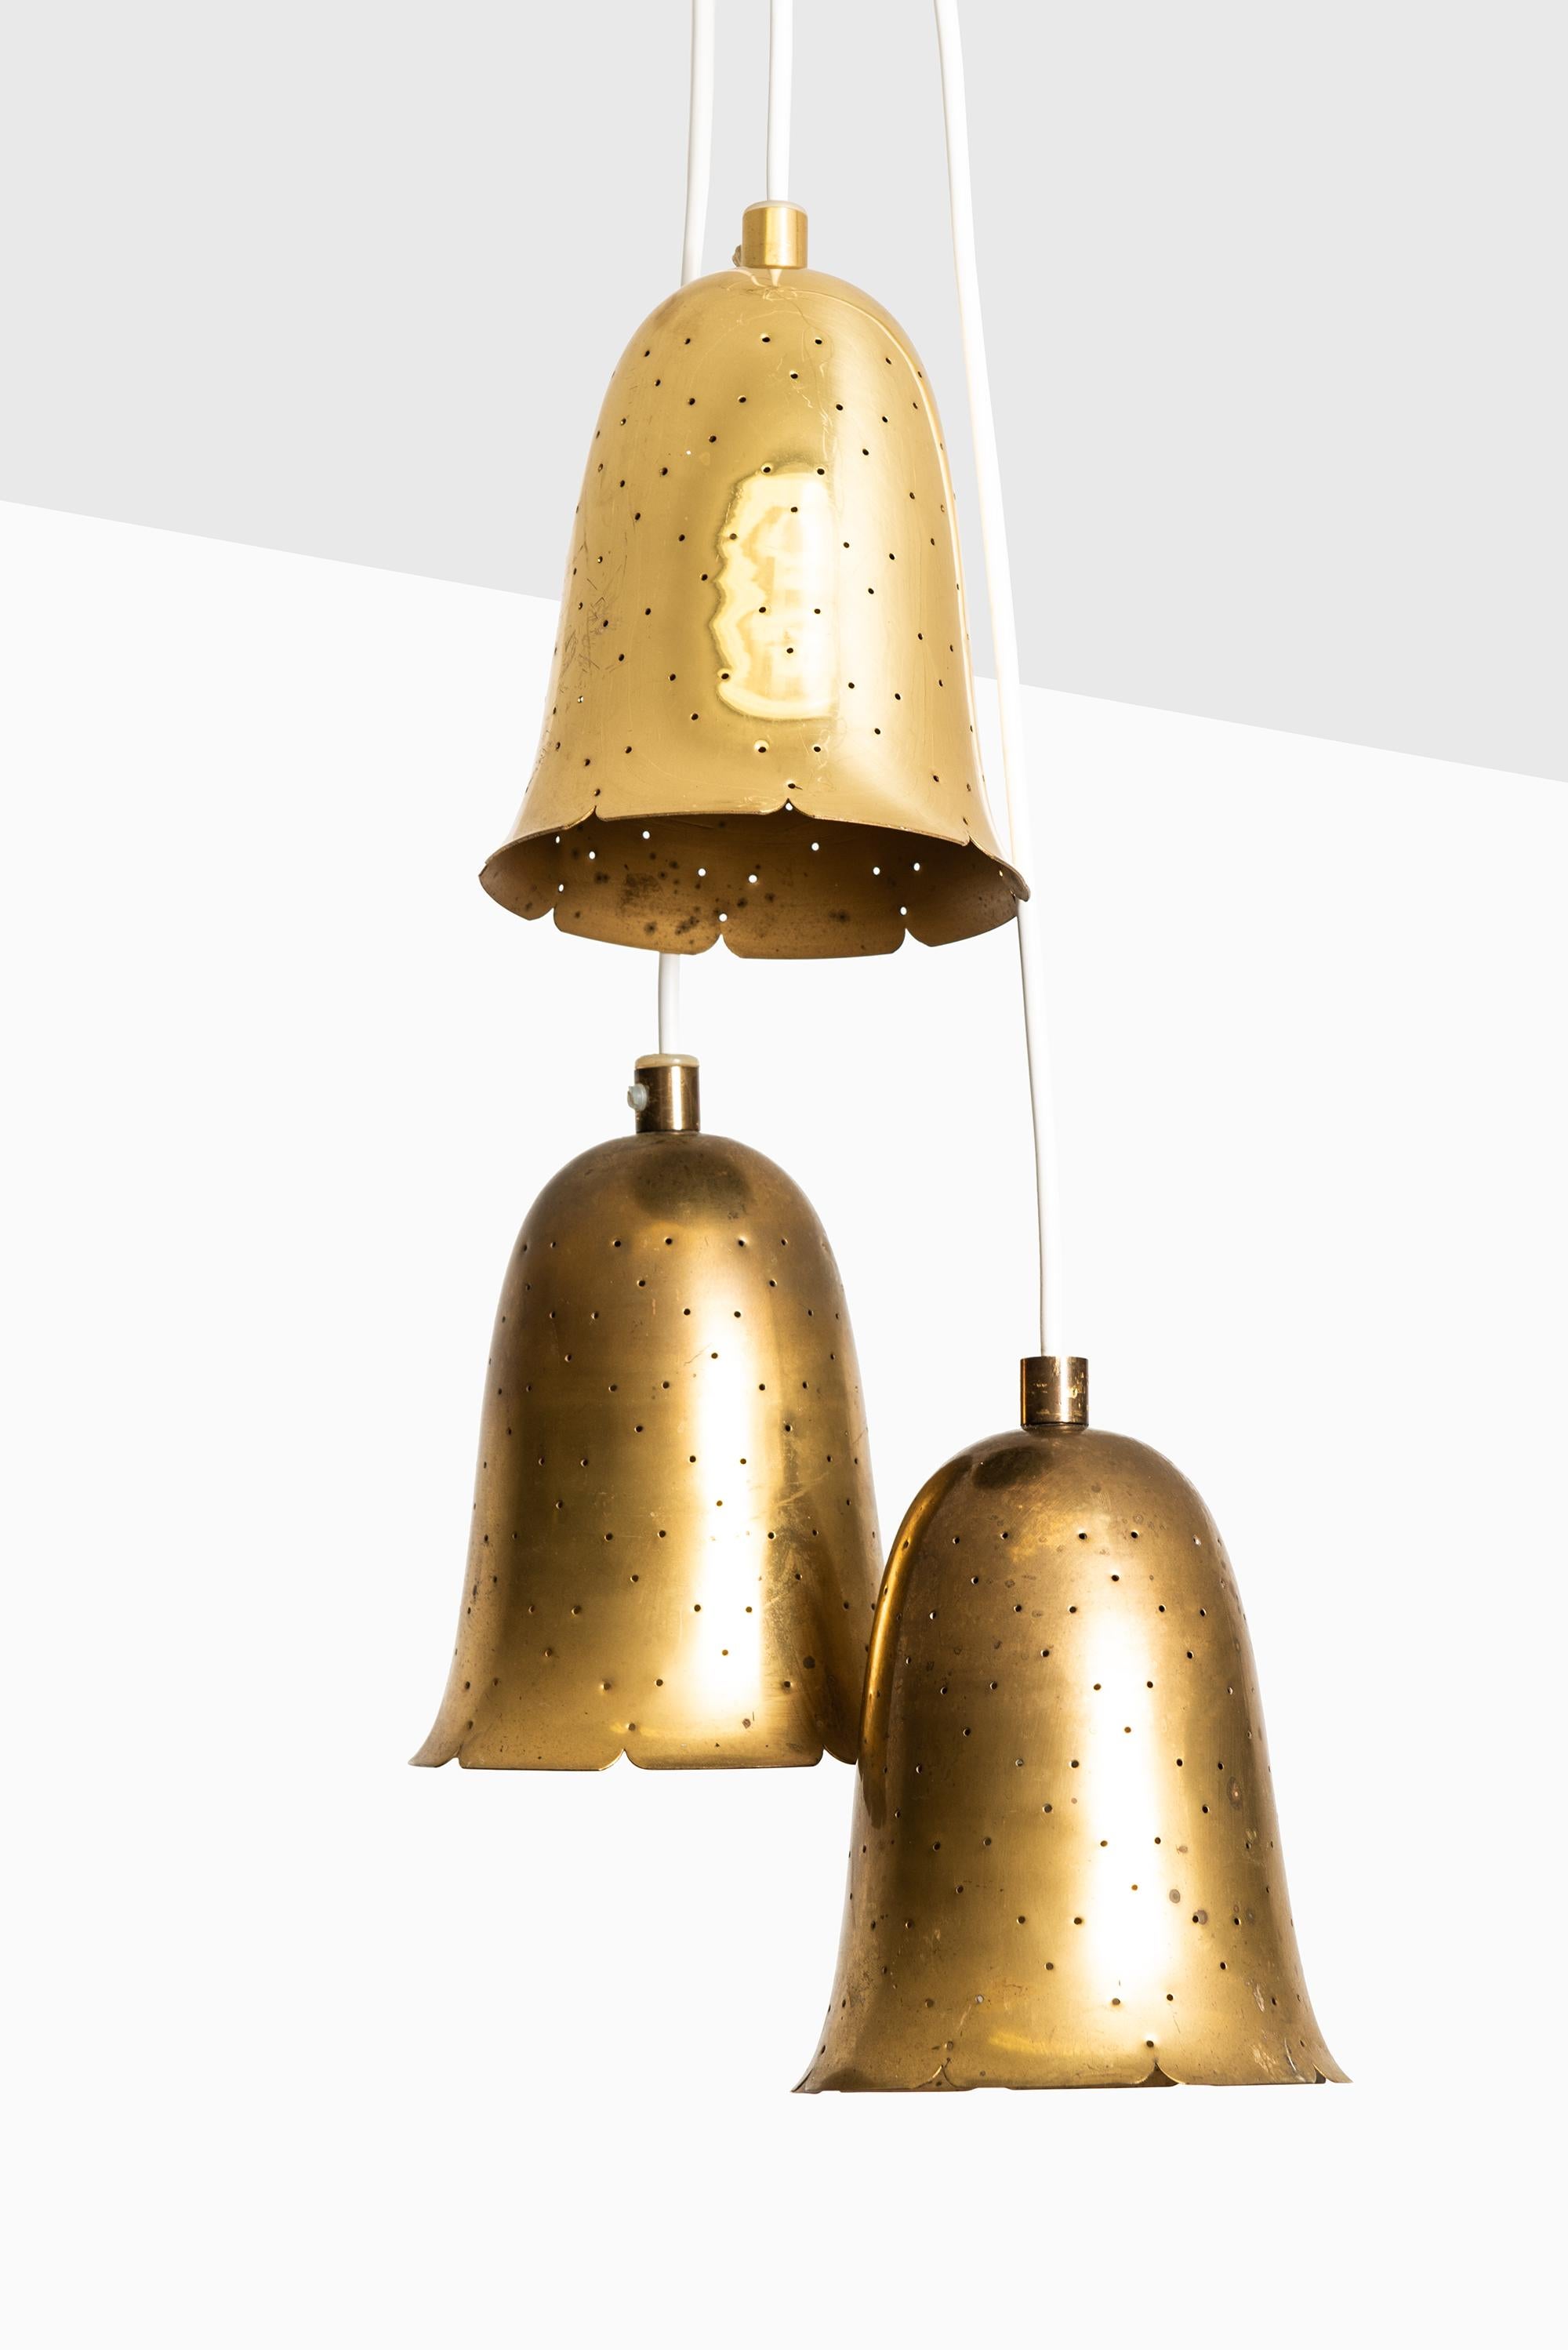 Ceiling lamps by unknown designer. Produced by Boréns in Sweden.